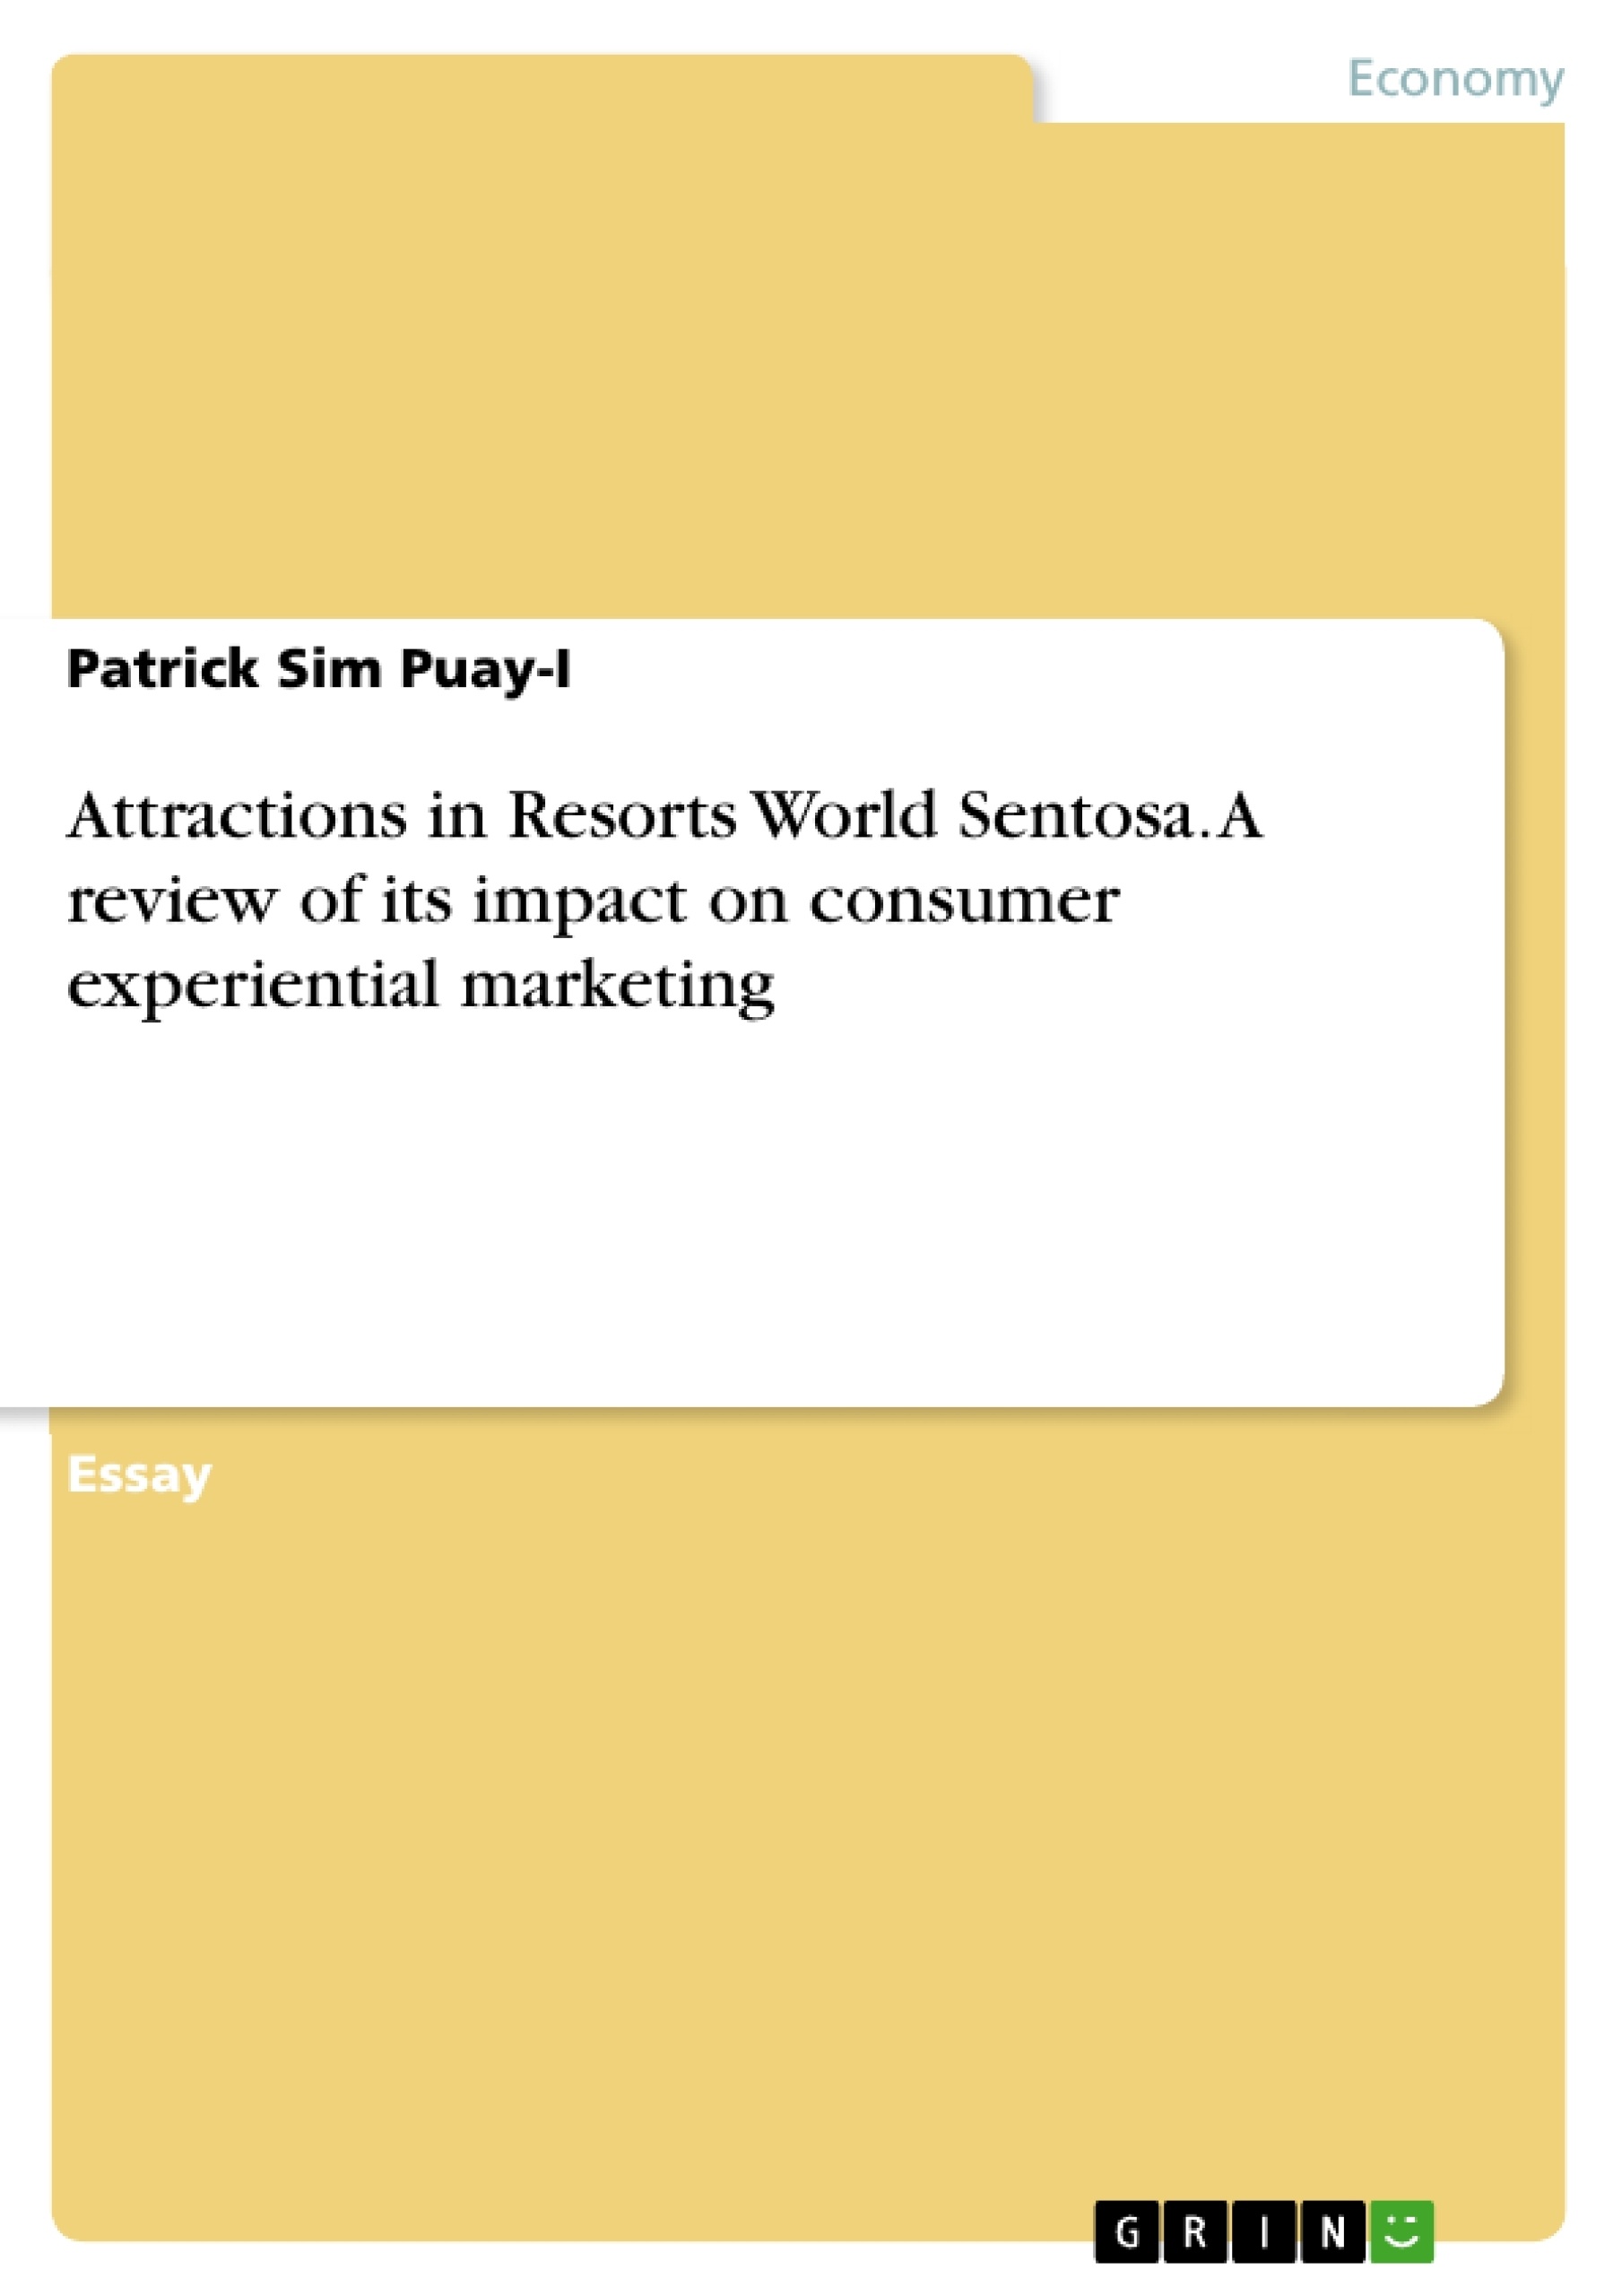 Title: Attractions in Resorts World Sentosa. A review of its impact on consumer experiential marketing